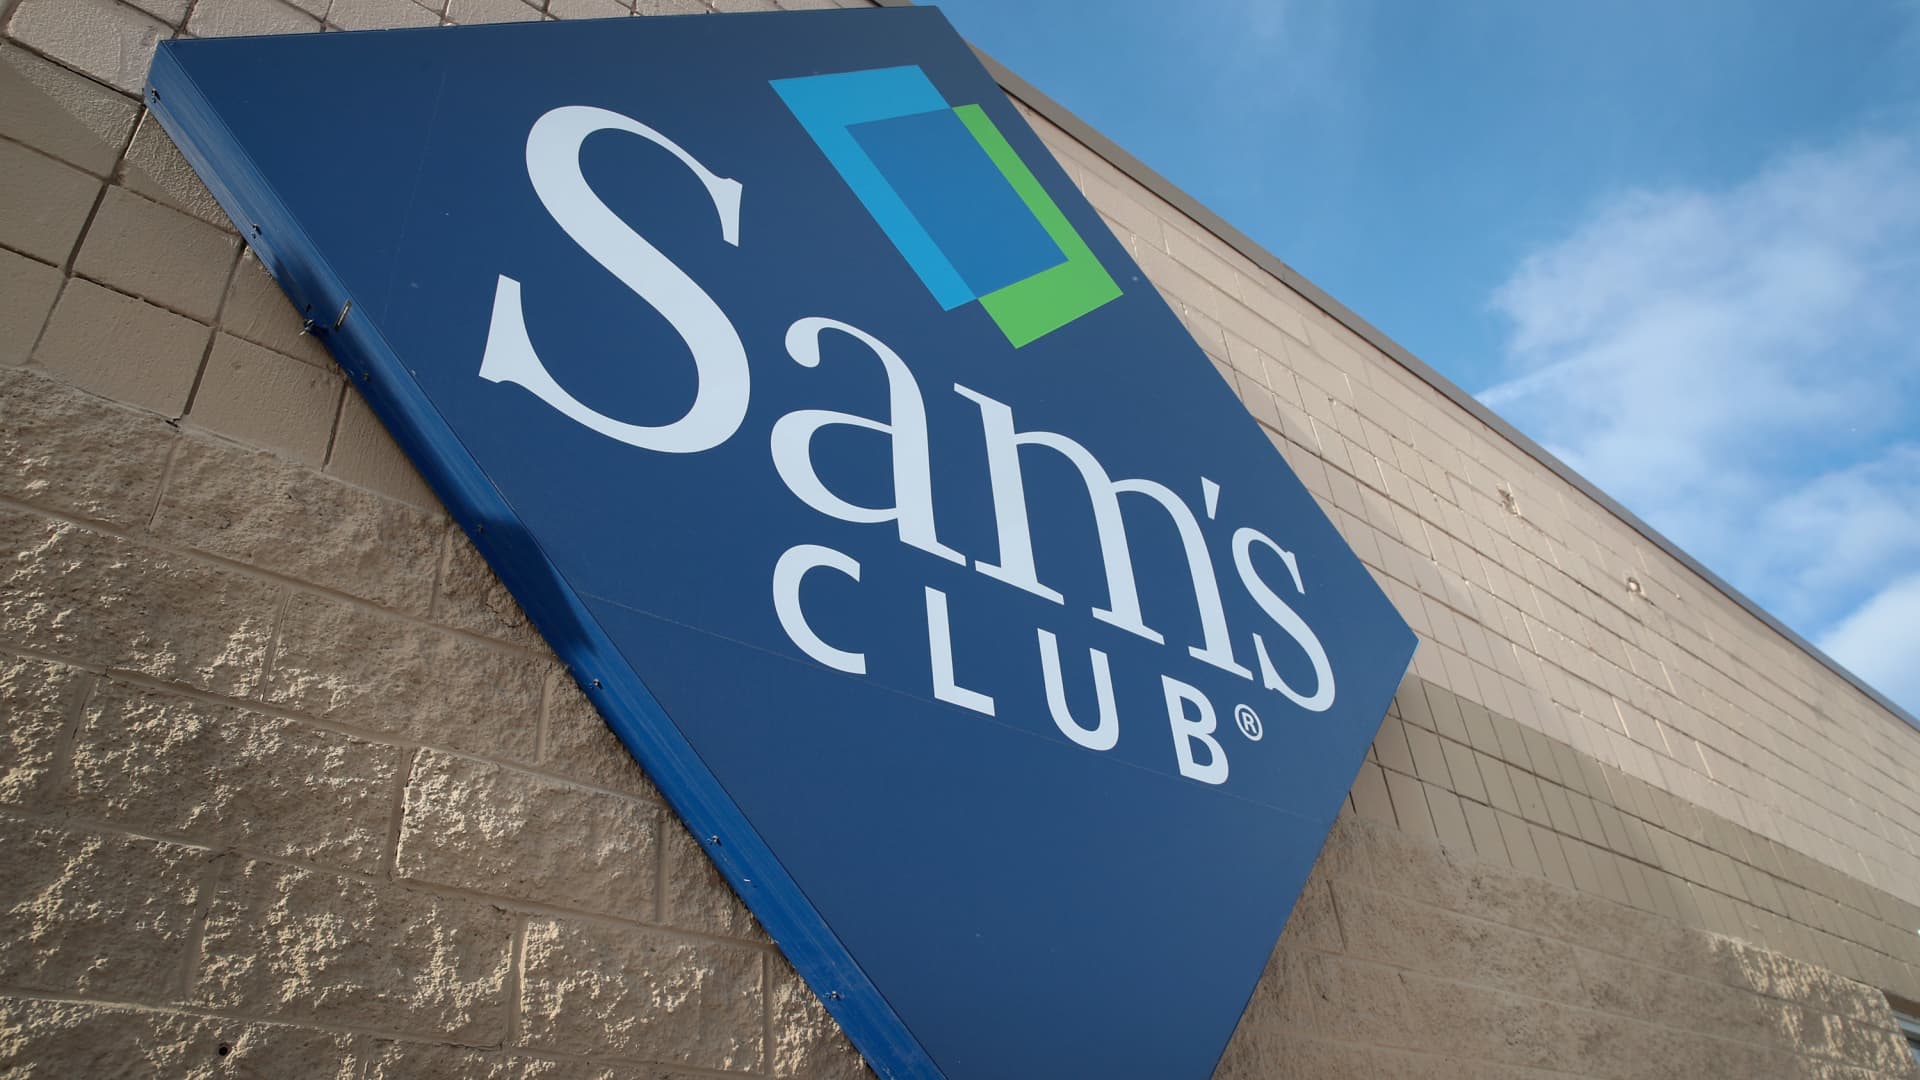 Walmart-owned Sam’s Club raises annual membership fee for first time in 9 years